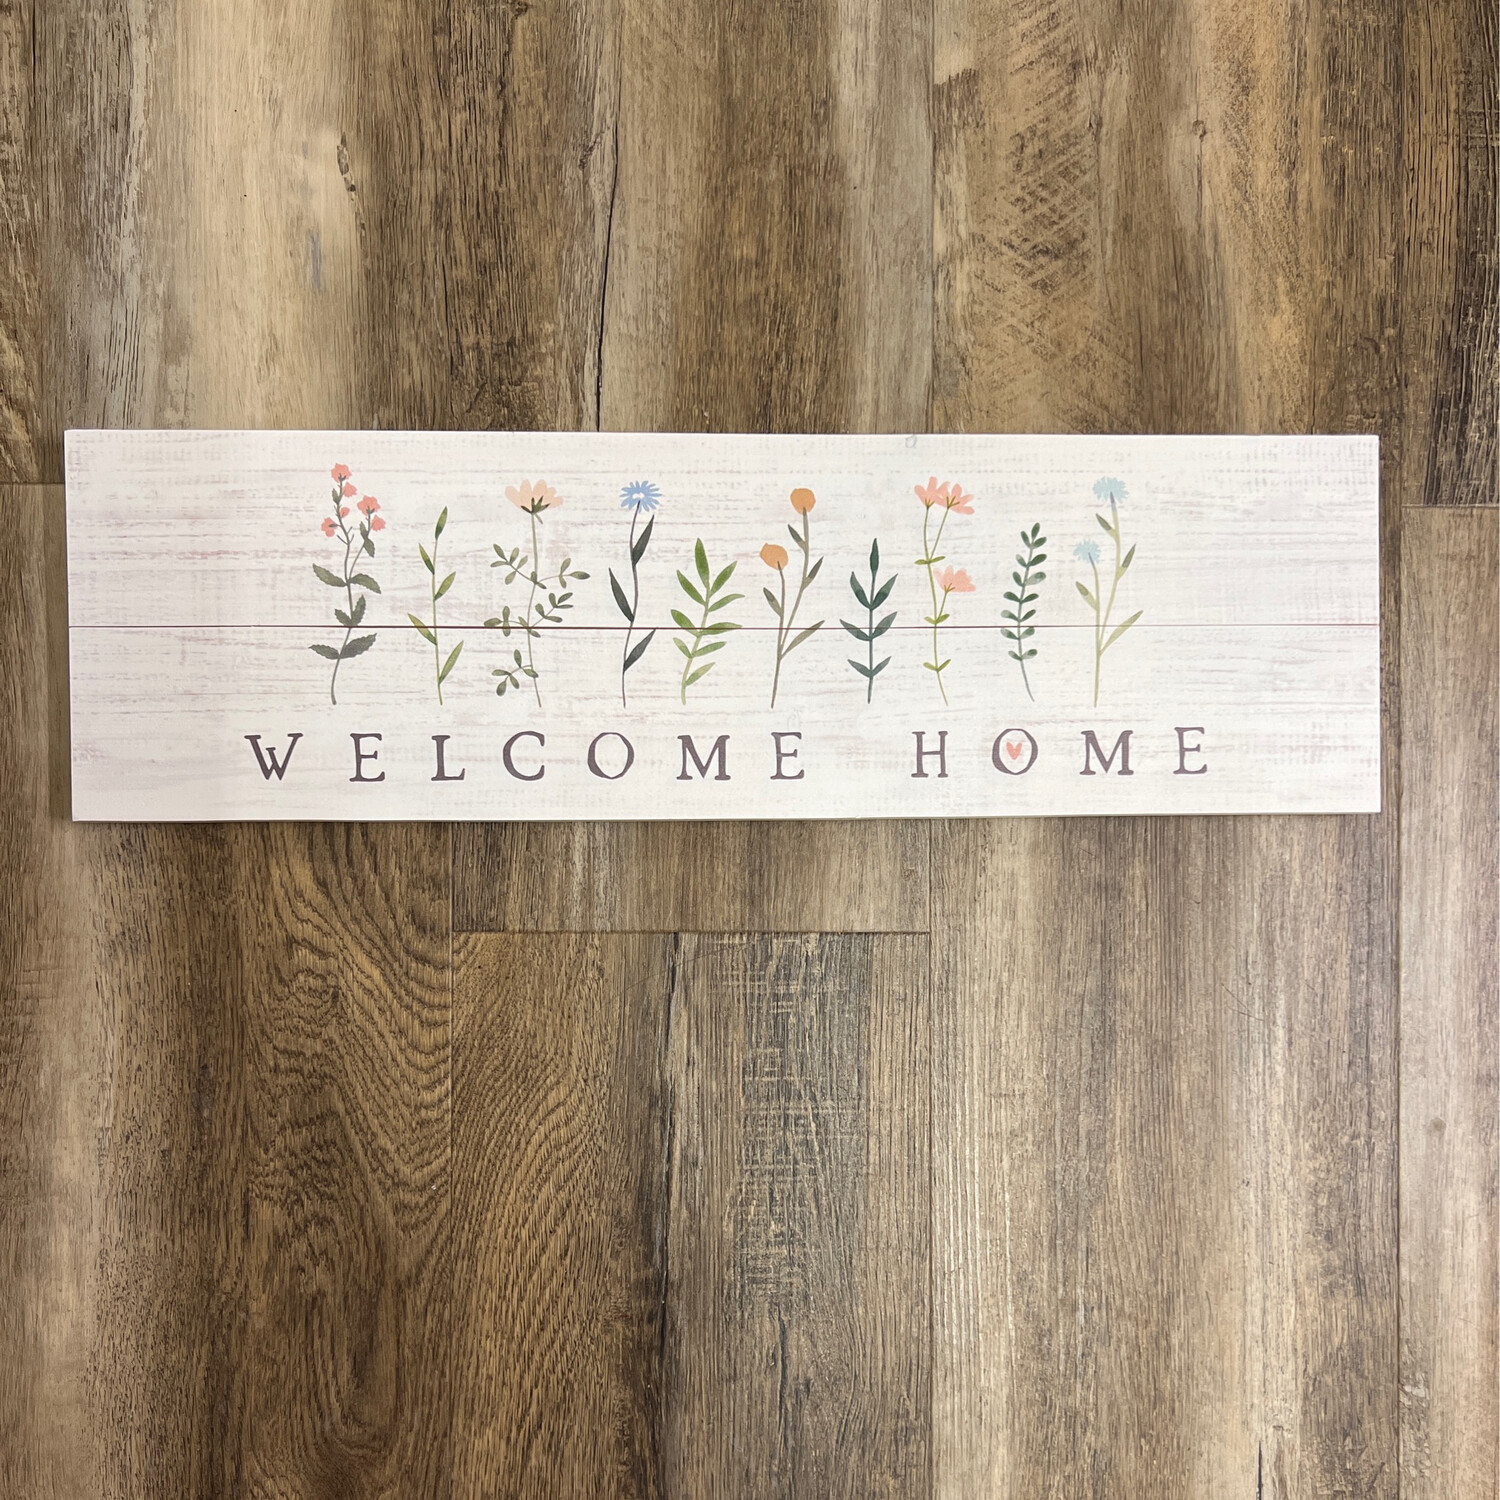 Welcome Home Floral Pallet Sign